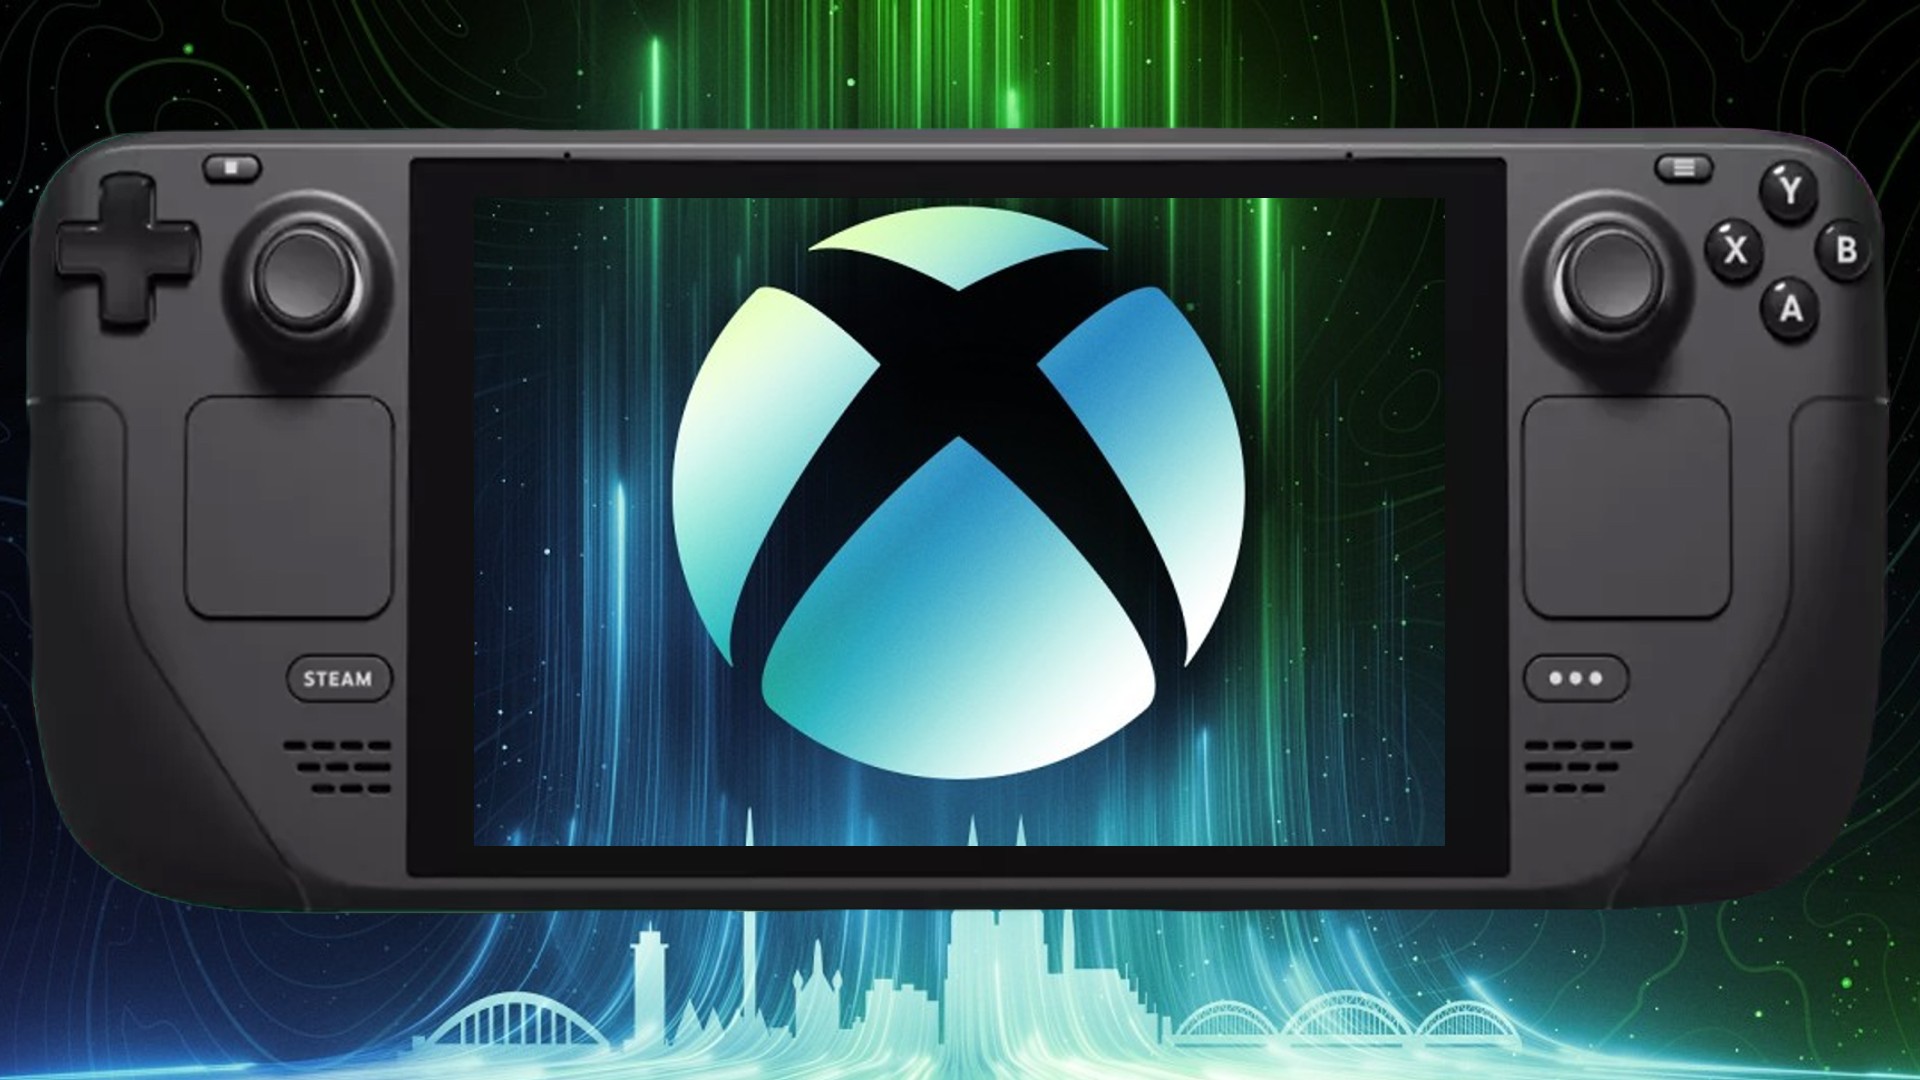 Phil Spencer pushes for handheld gaming PC OS that mirrors Xbox gaming ecosystem